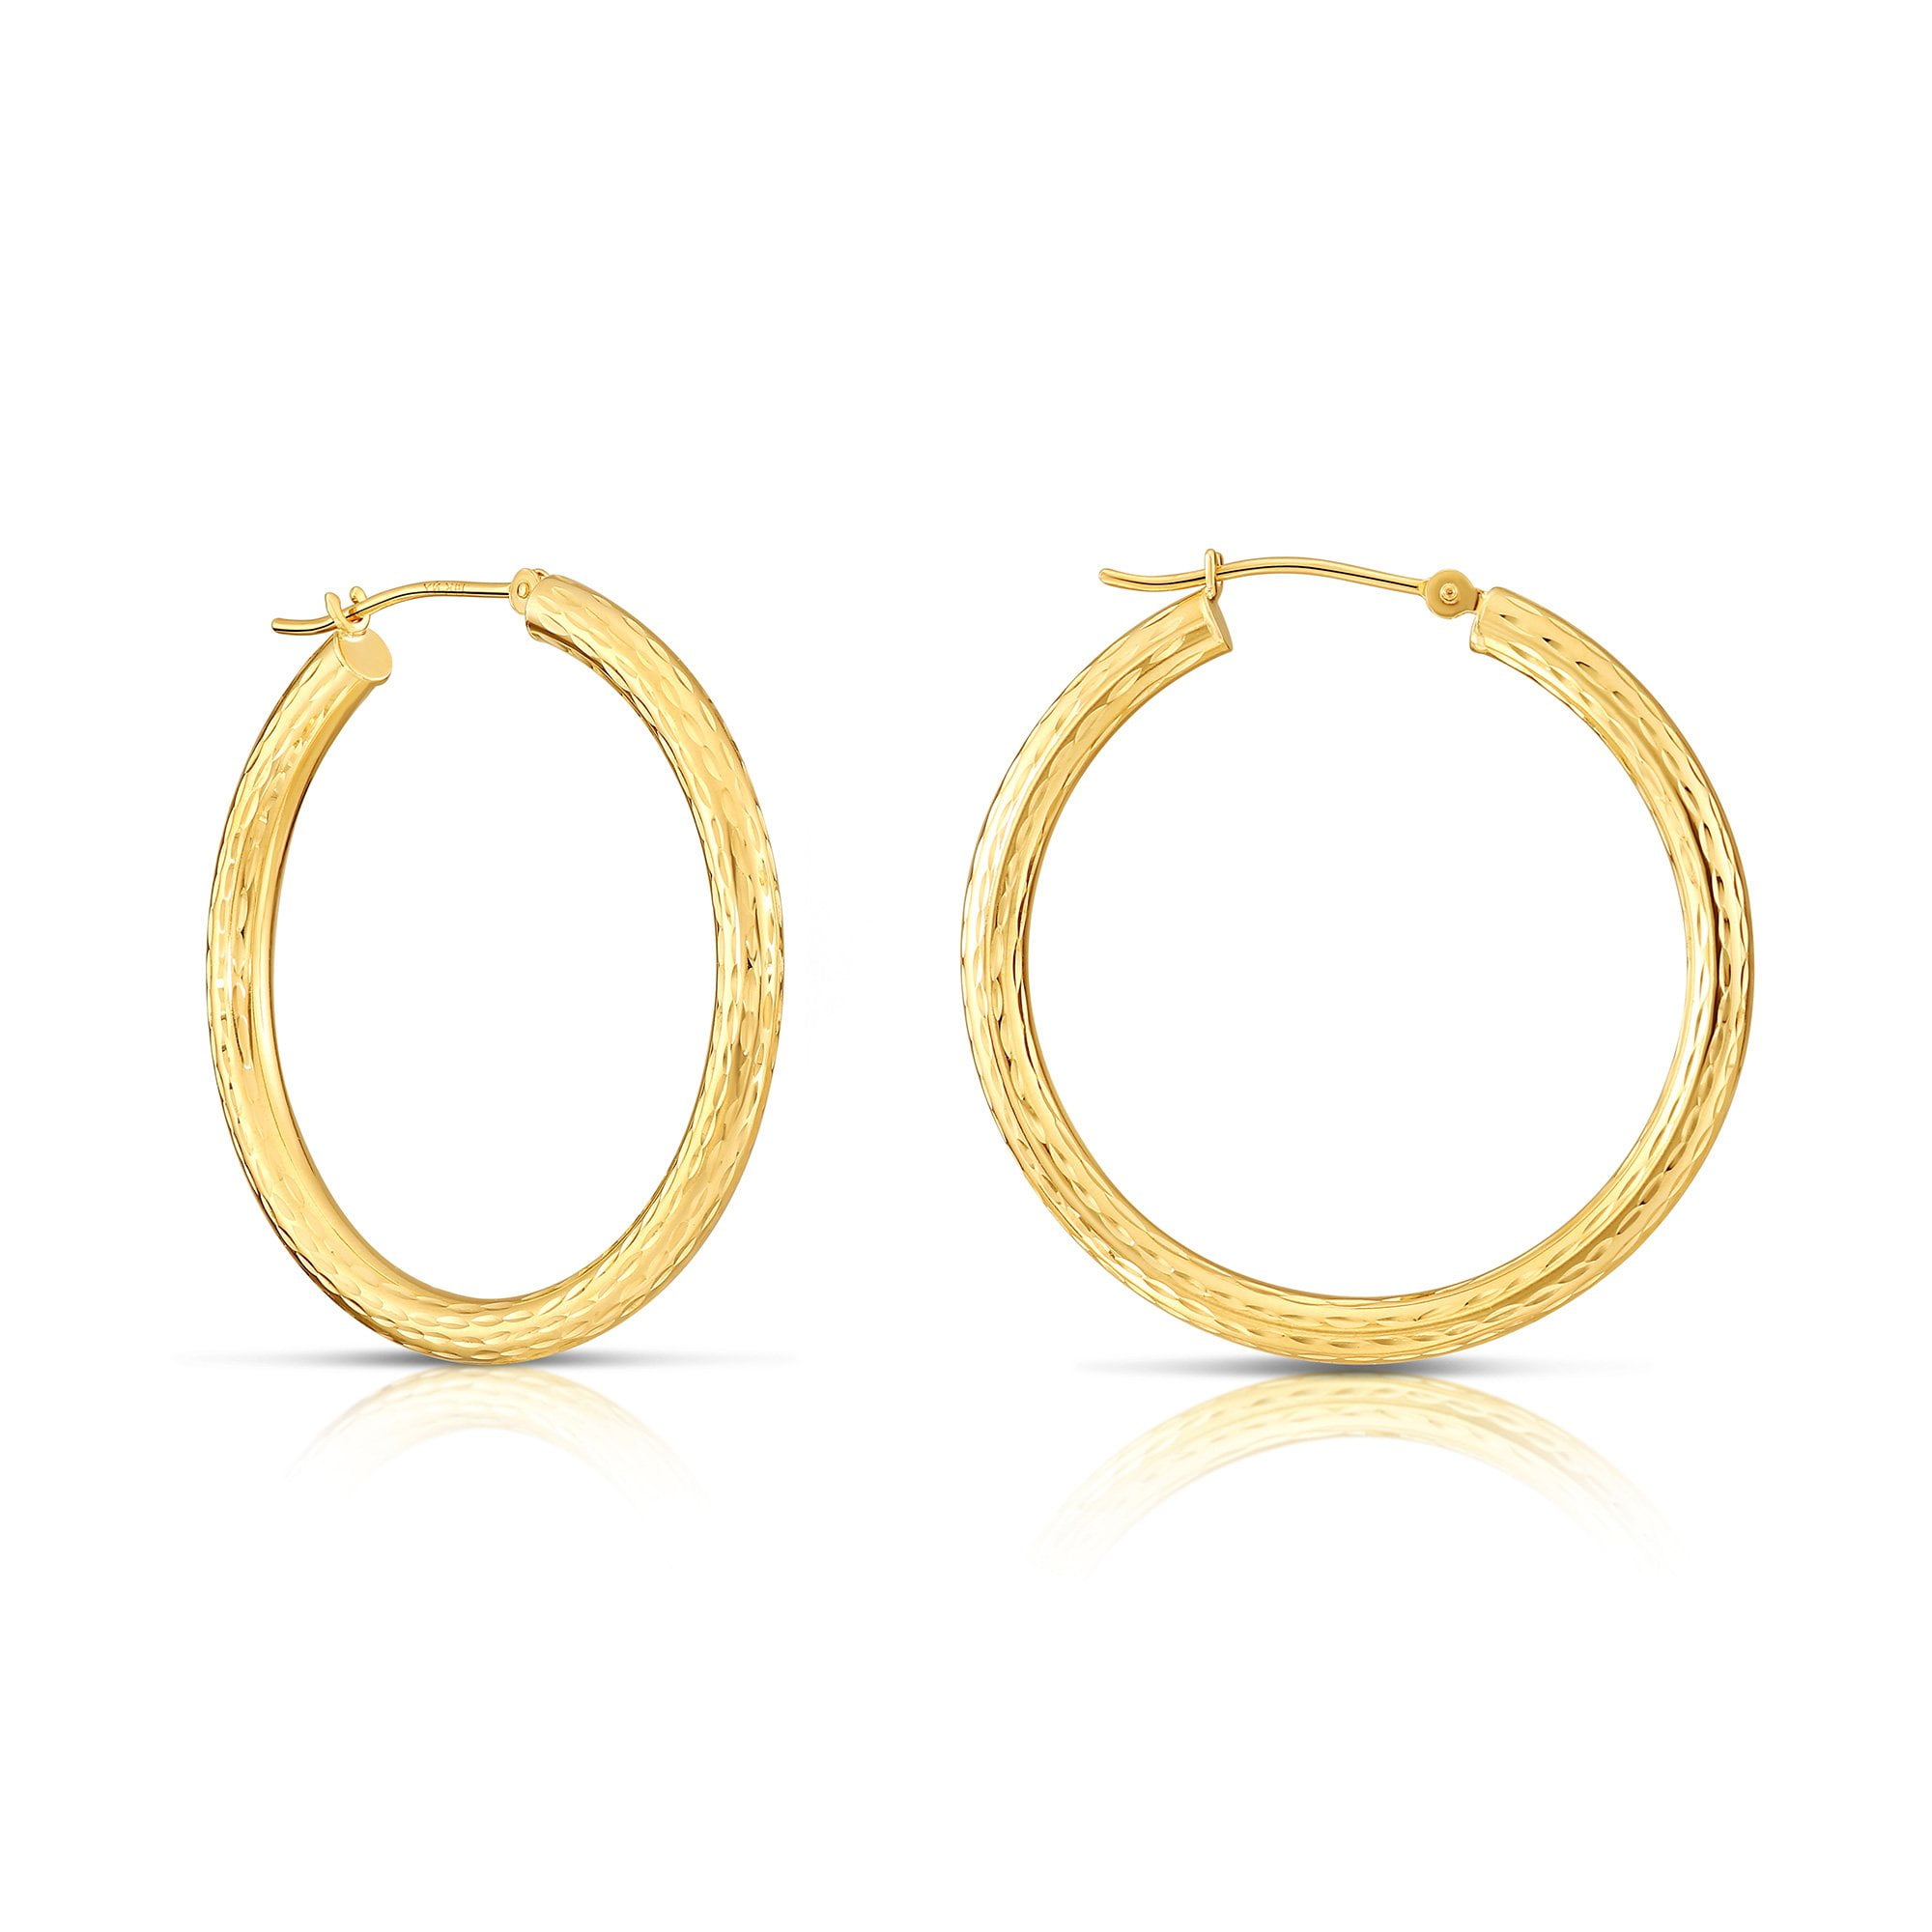 2 3/8" Large Plain Shiny Round Hoop Earrings REAL 14K Yellow Gold 4mm X 60mm